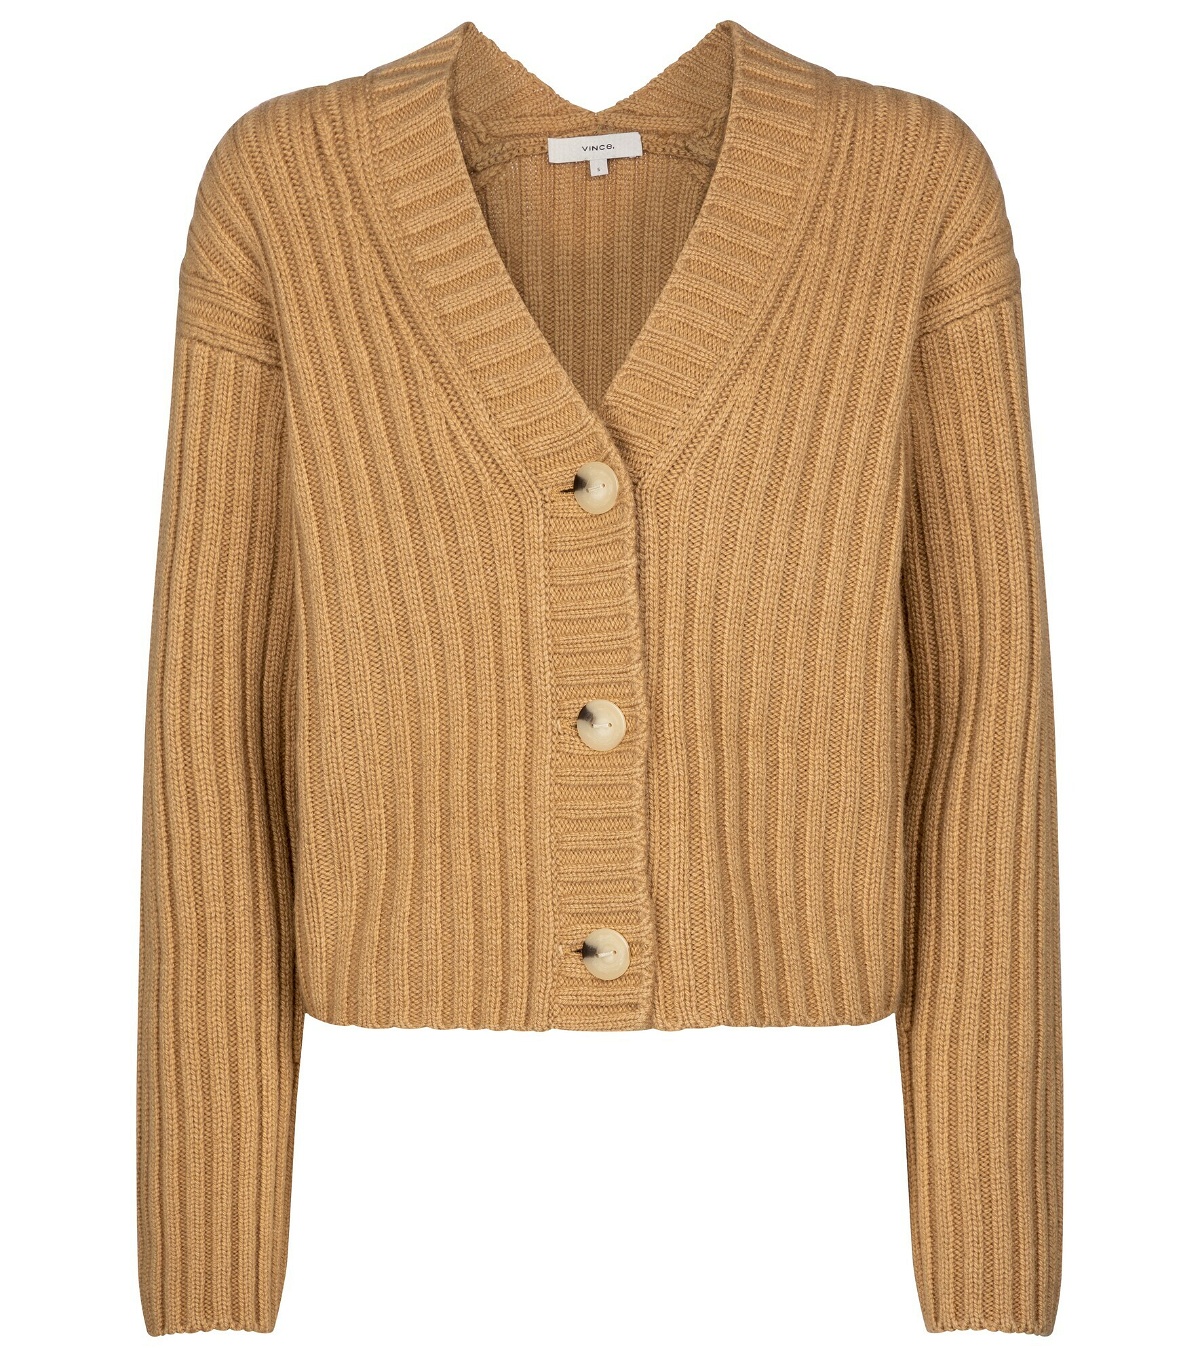 Vince - Wool and cashmere cardigan Vince